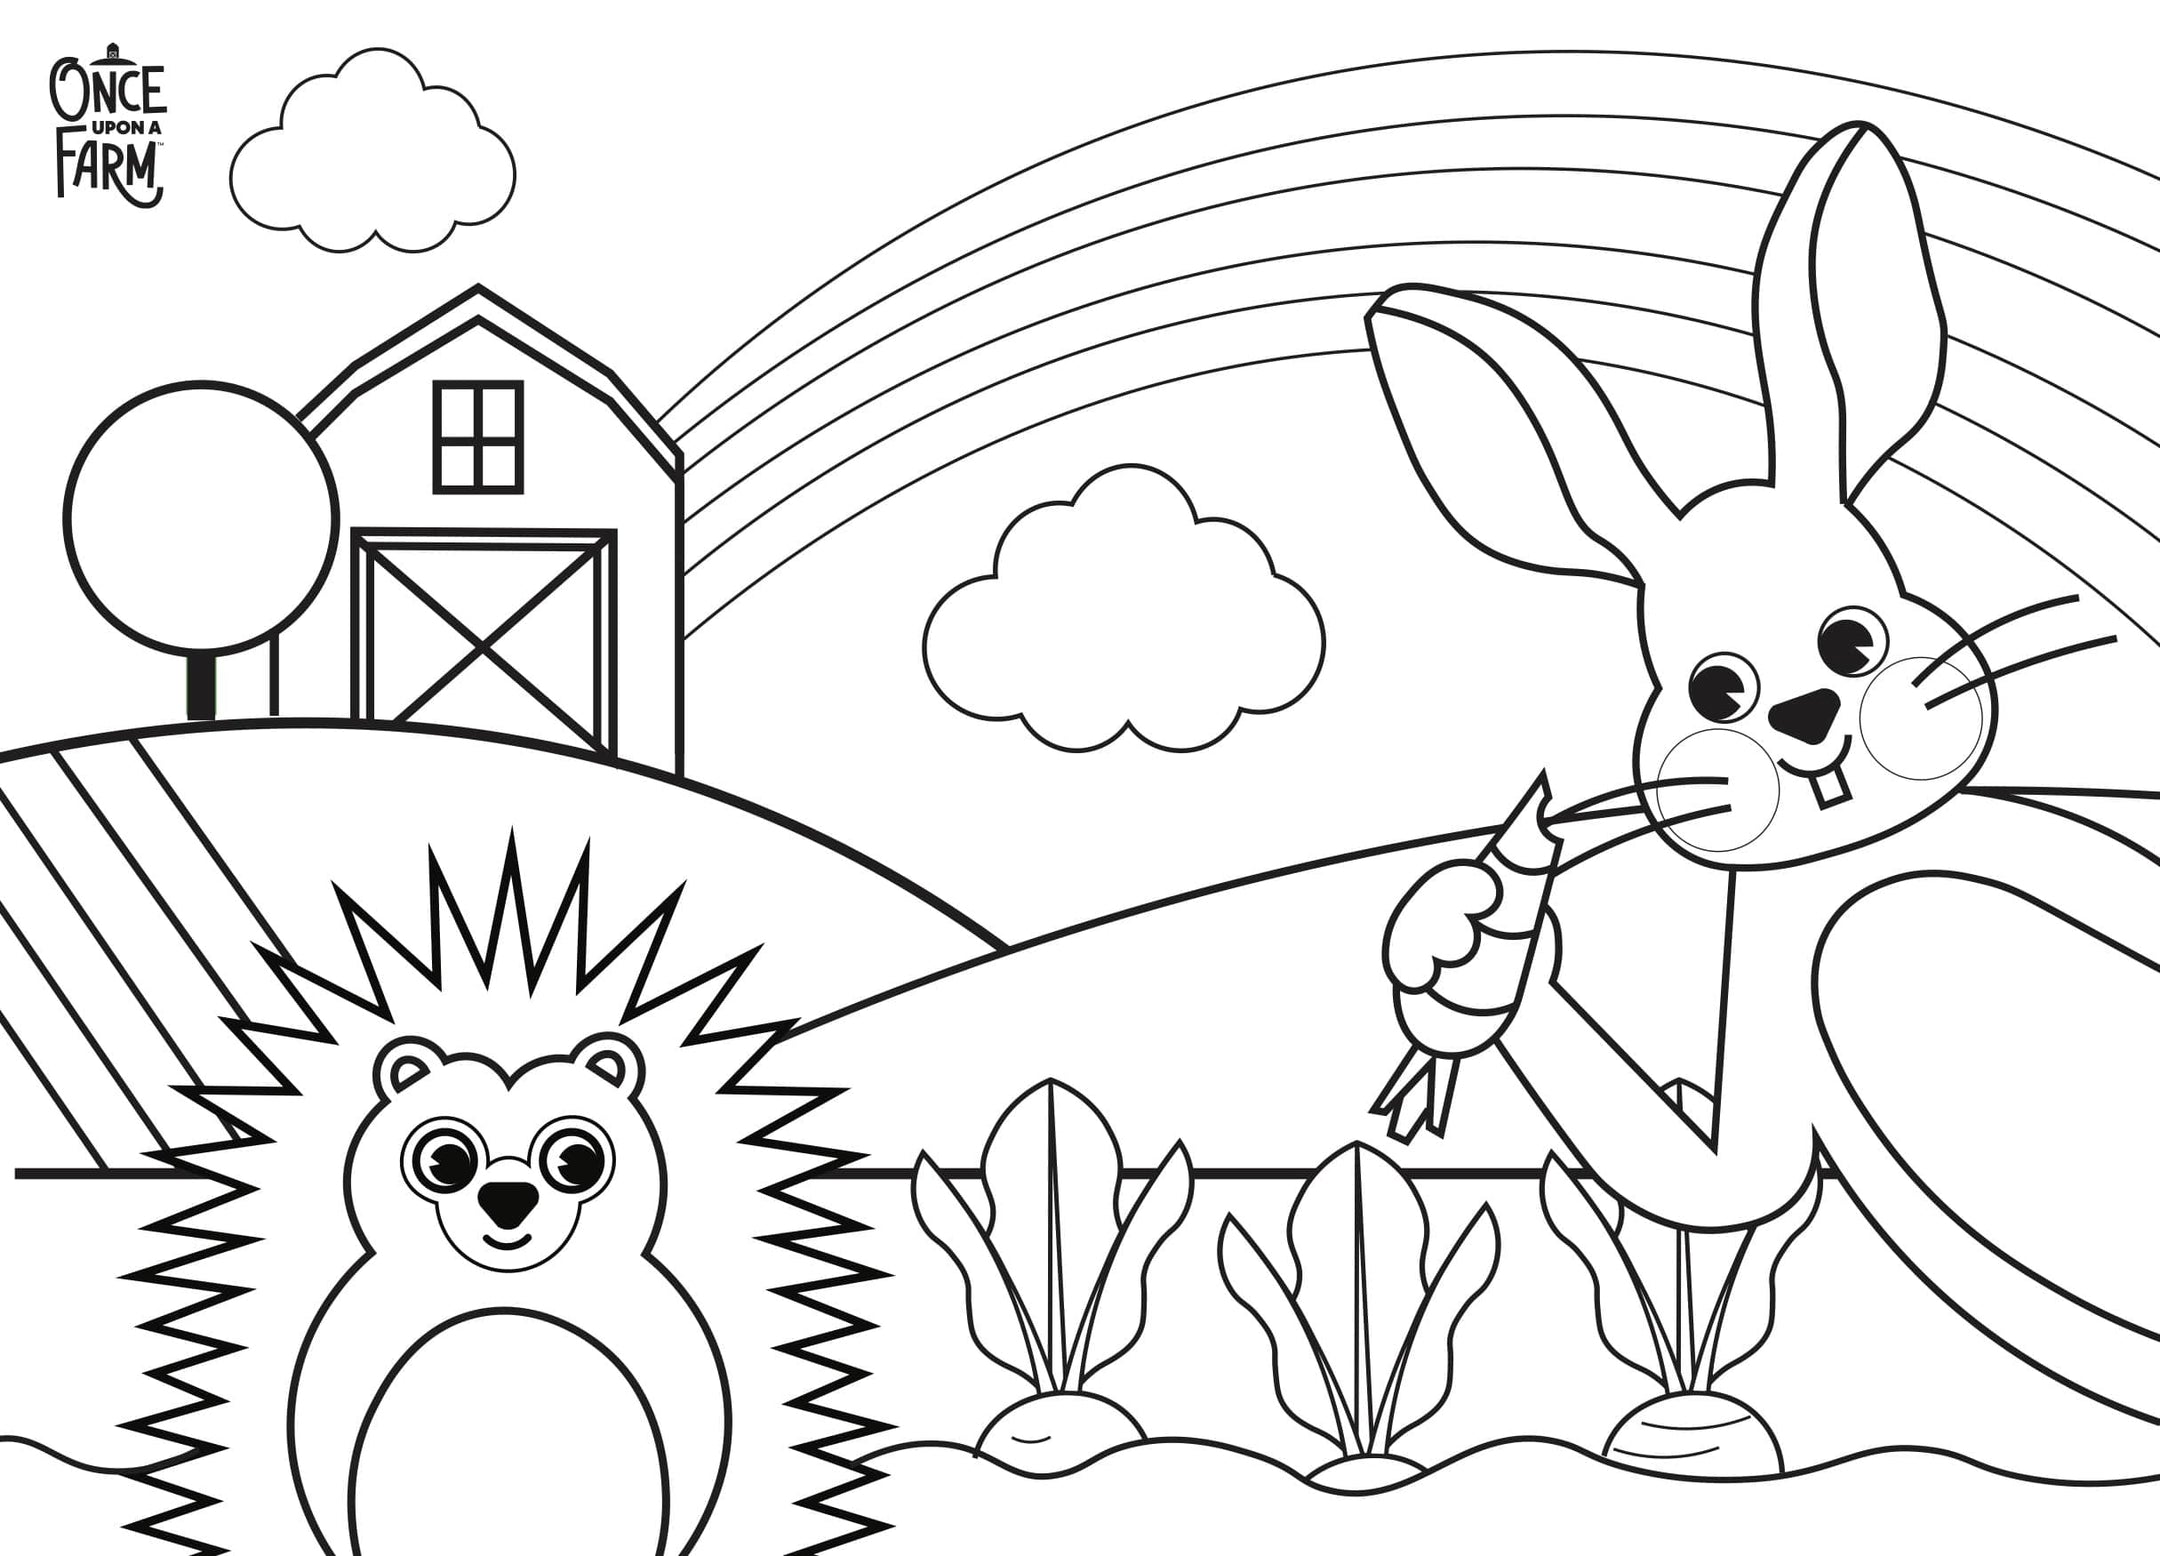 Spring on the farm coloring page once upon a farm